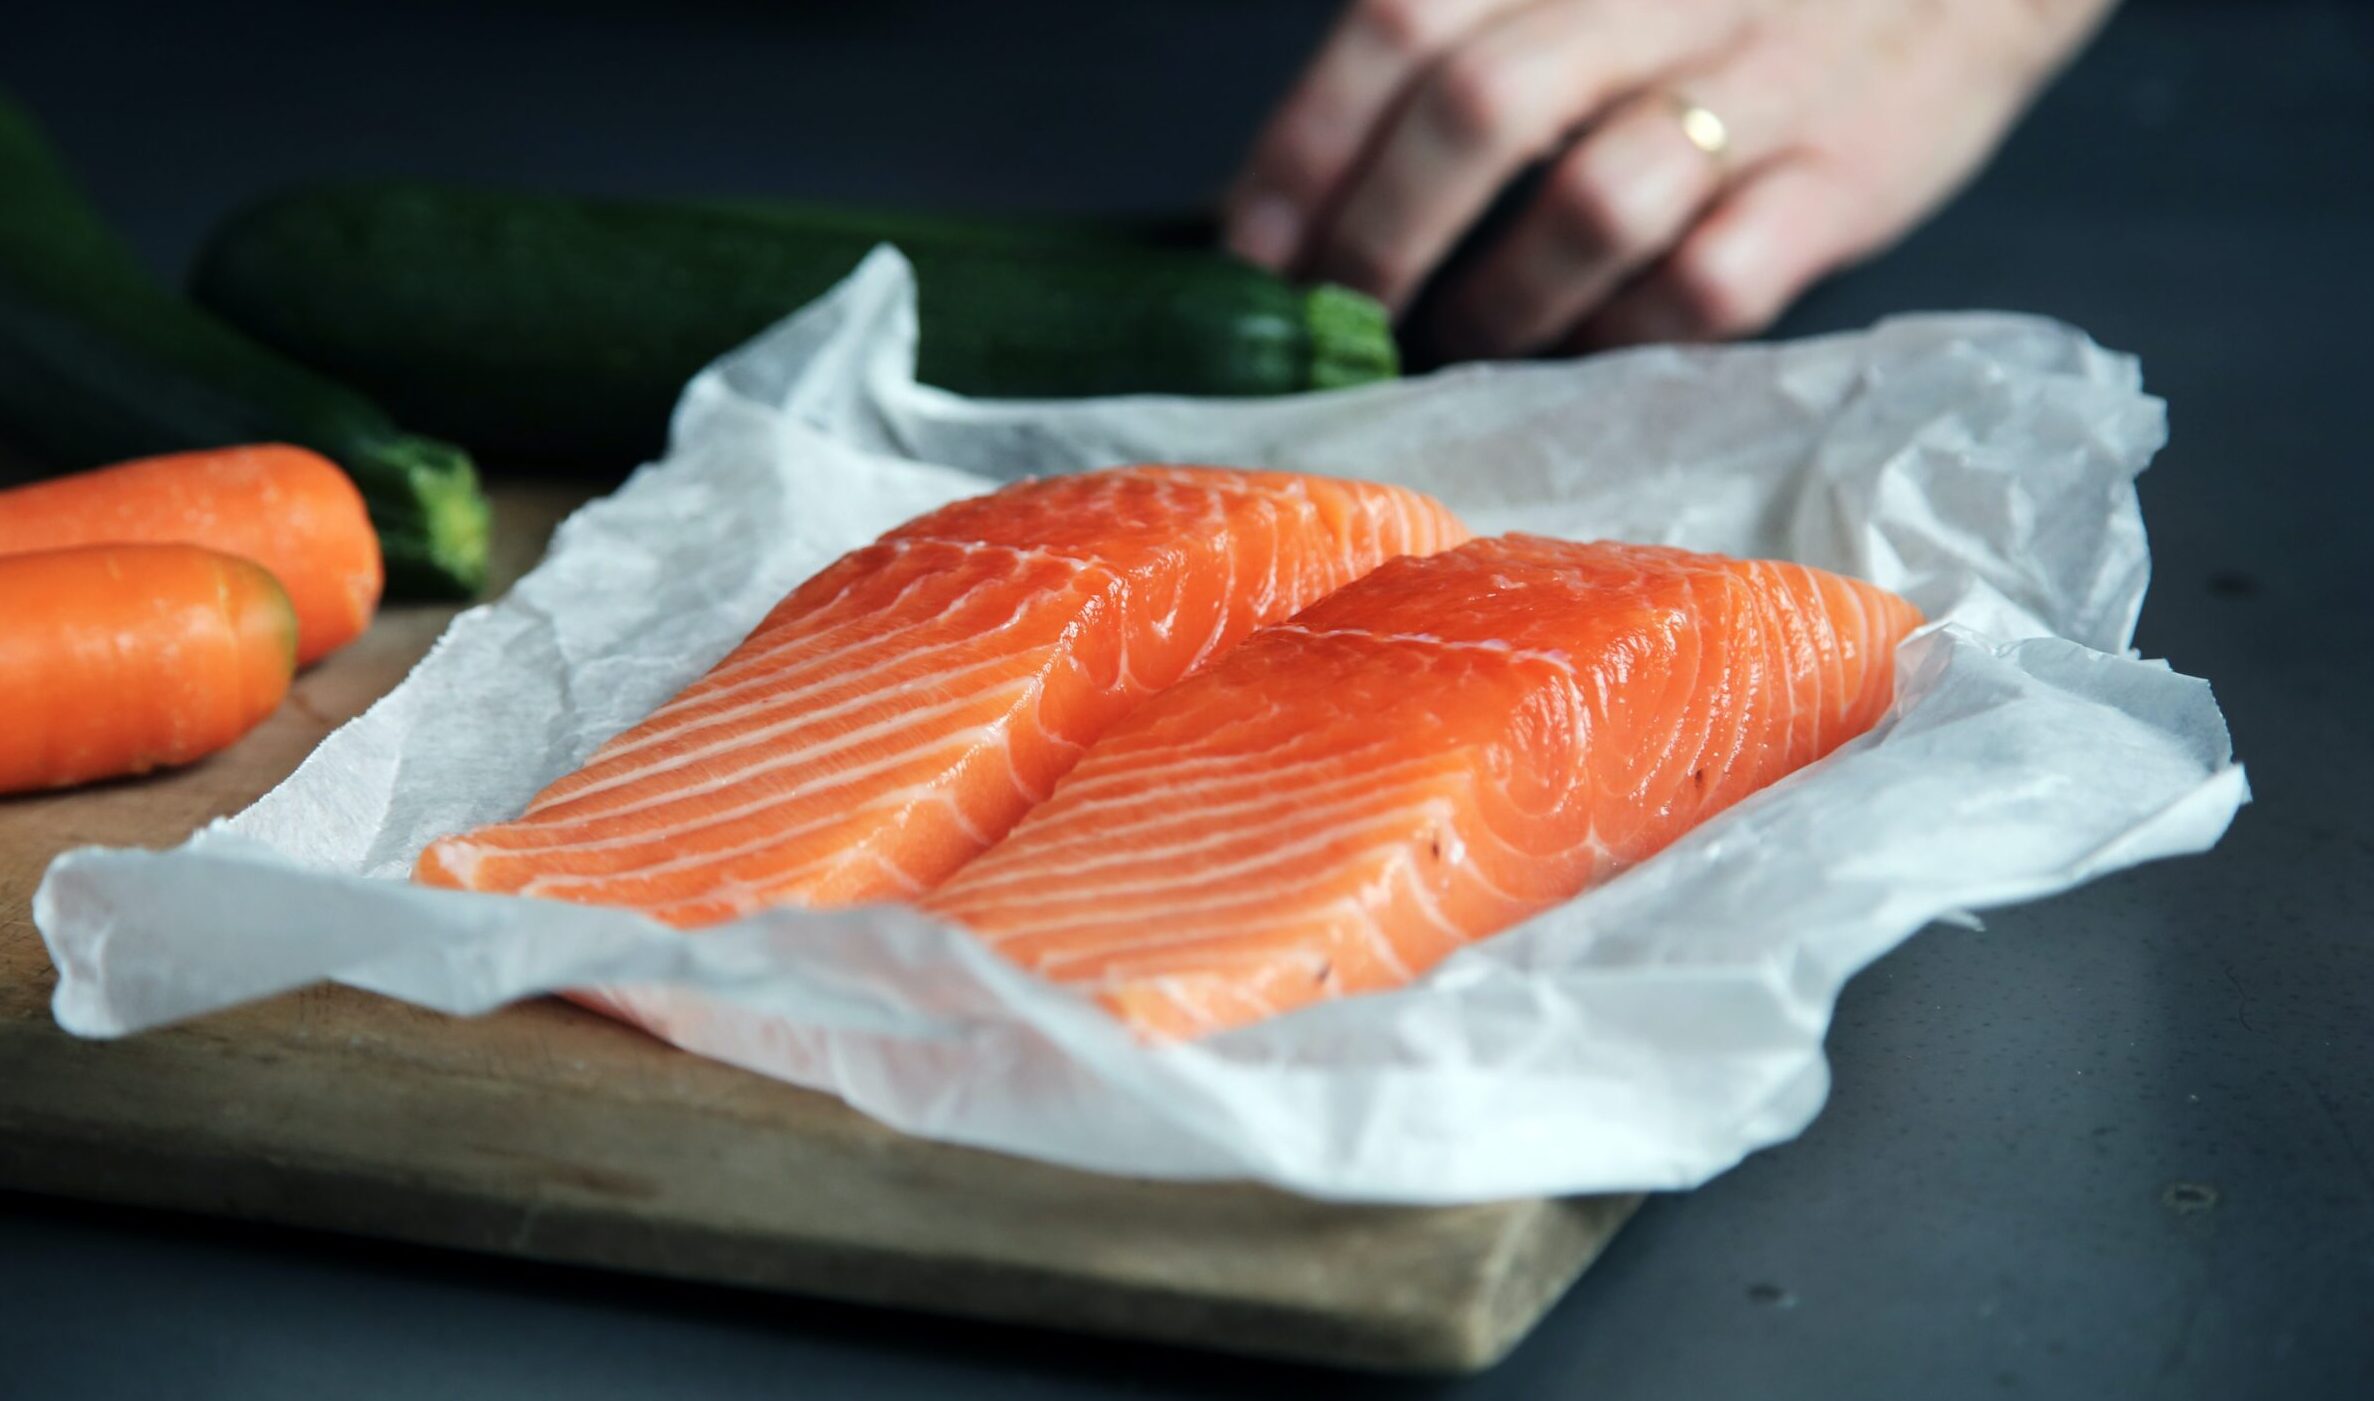 Is salmon healthy to eat everyday?